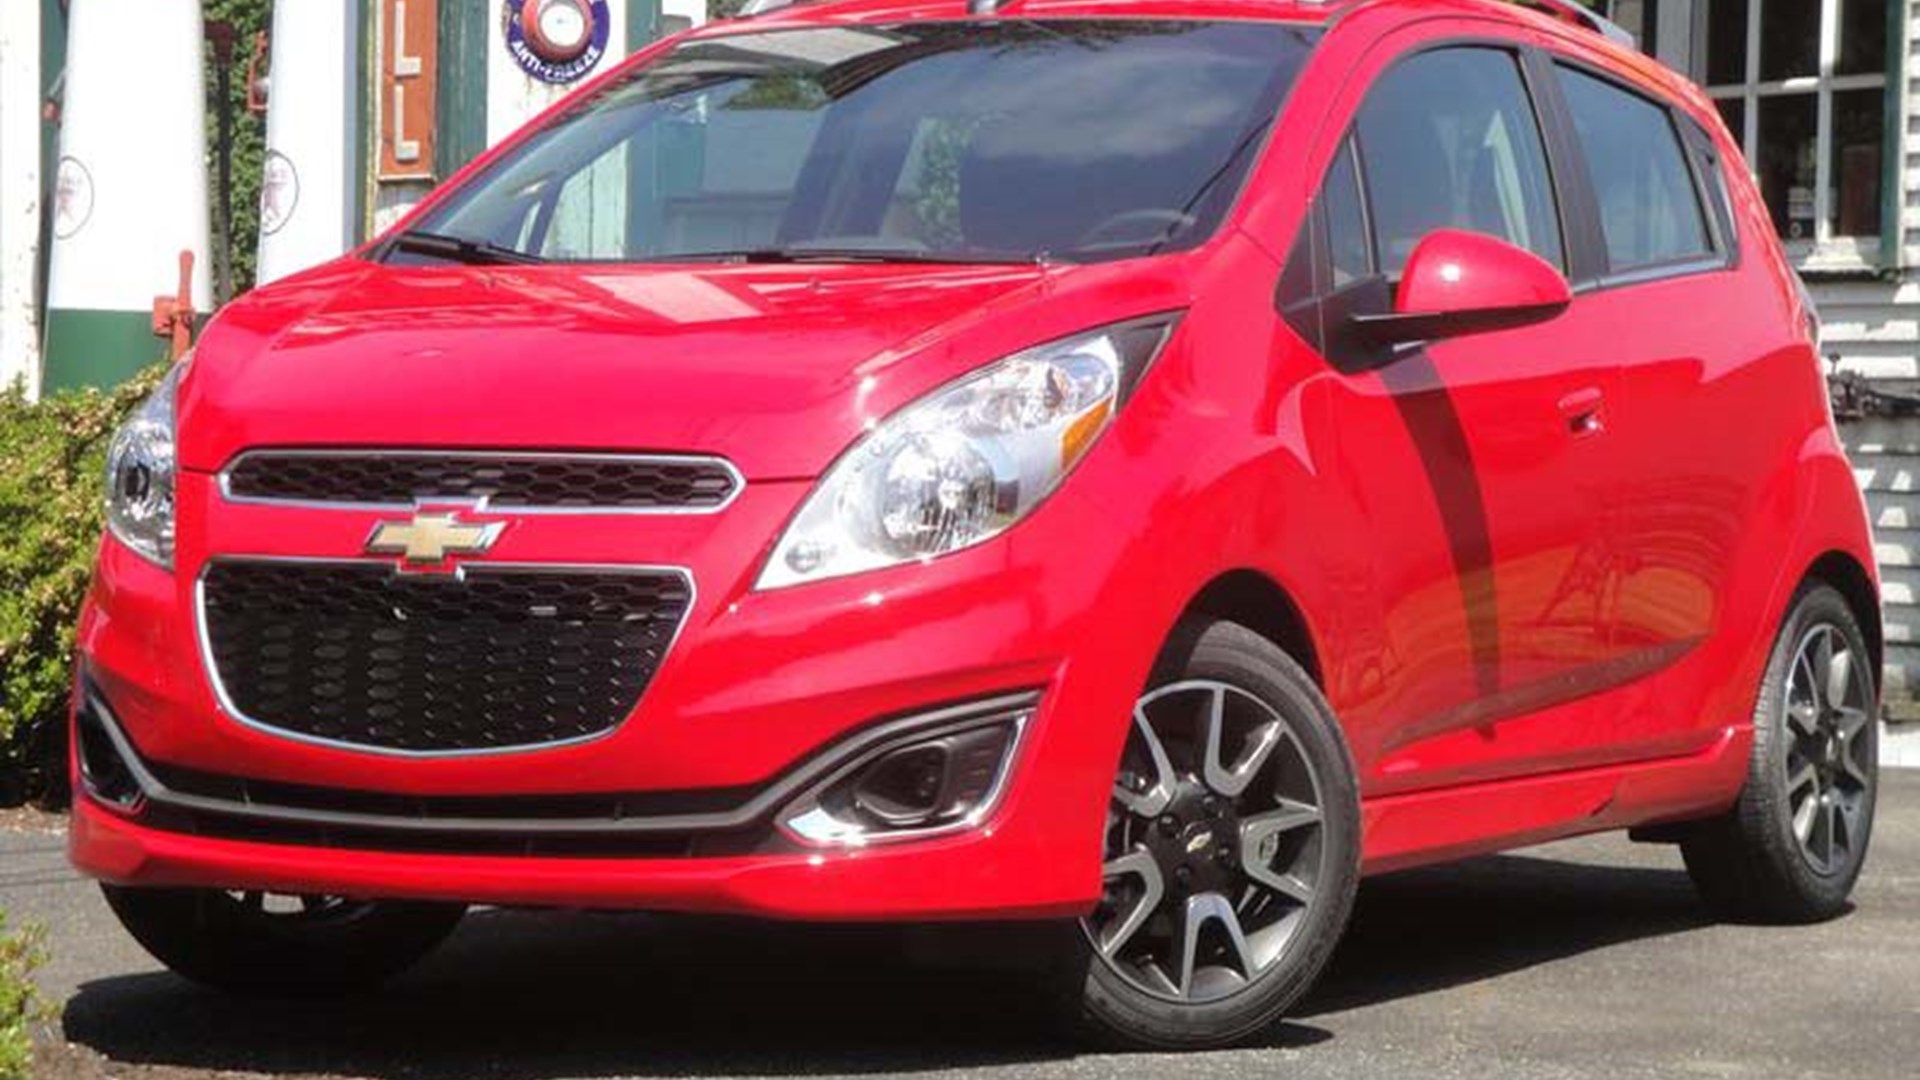 Used Chevrolet Spark Review - 2013-2015 | AutoTrader.ca